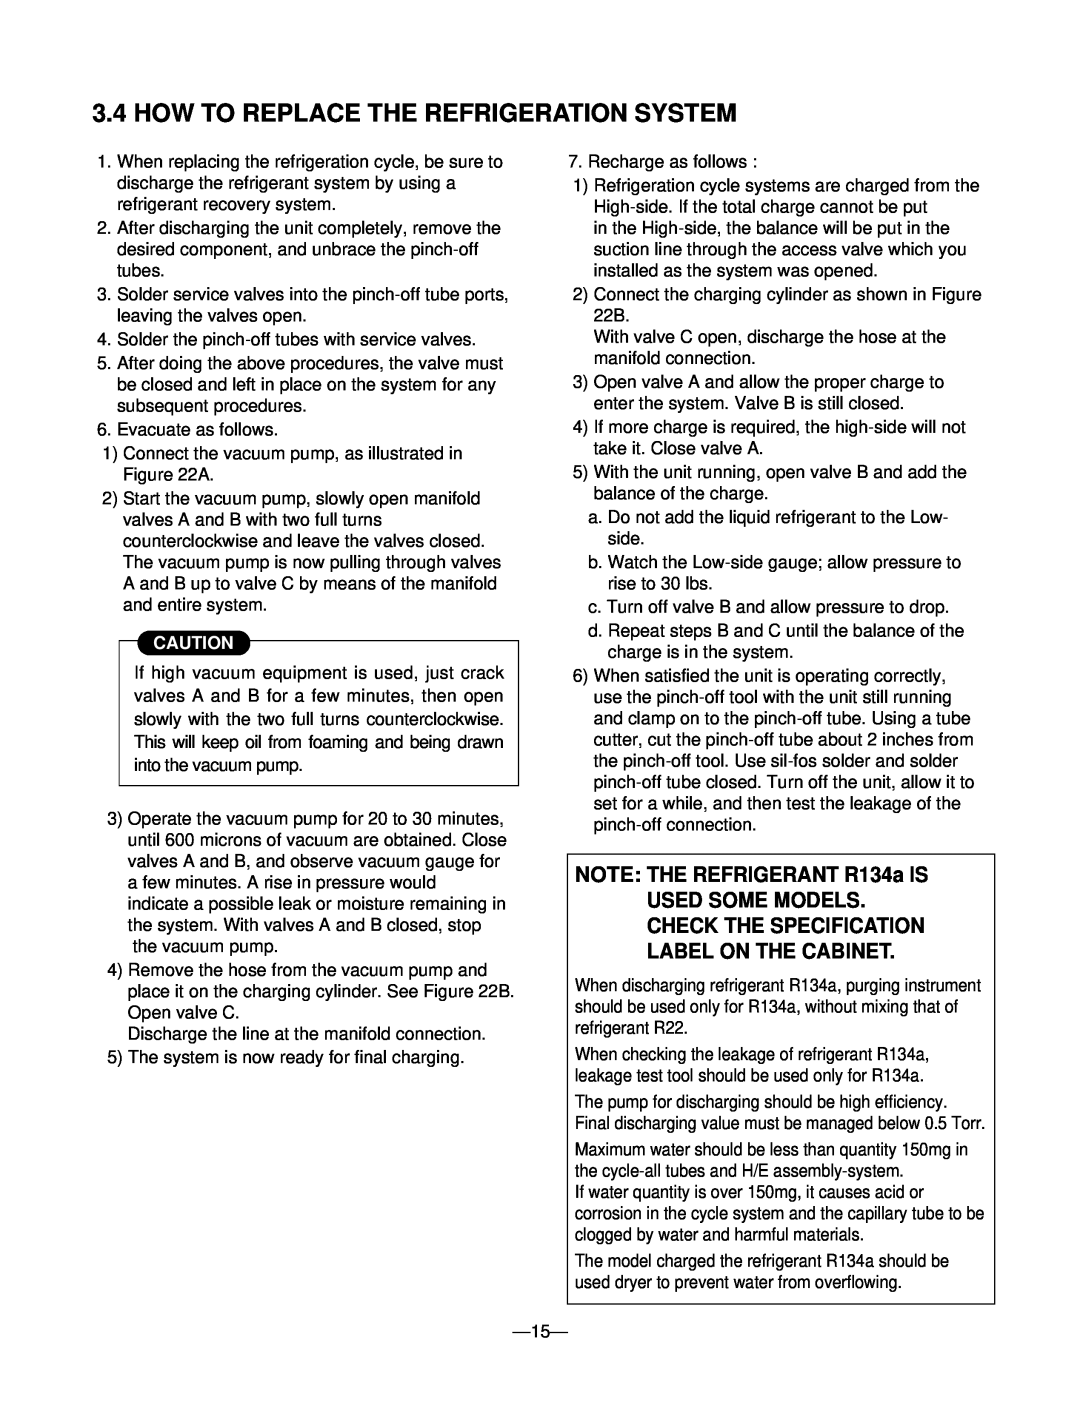 Goldstar DHA4012DL, DHA5012DL, DH5010B, DHA3012DL How To Replace The Refrigeration System, NOTE THE REFRIGERANT R134a IS 